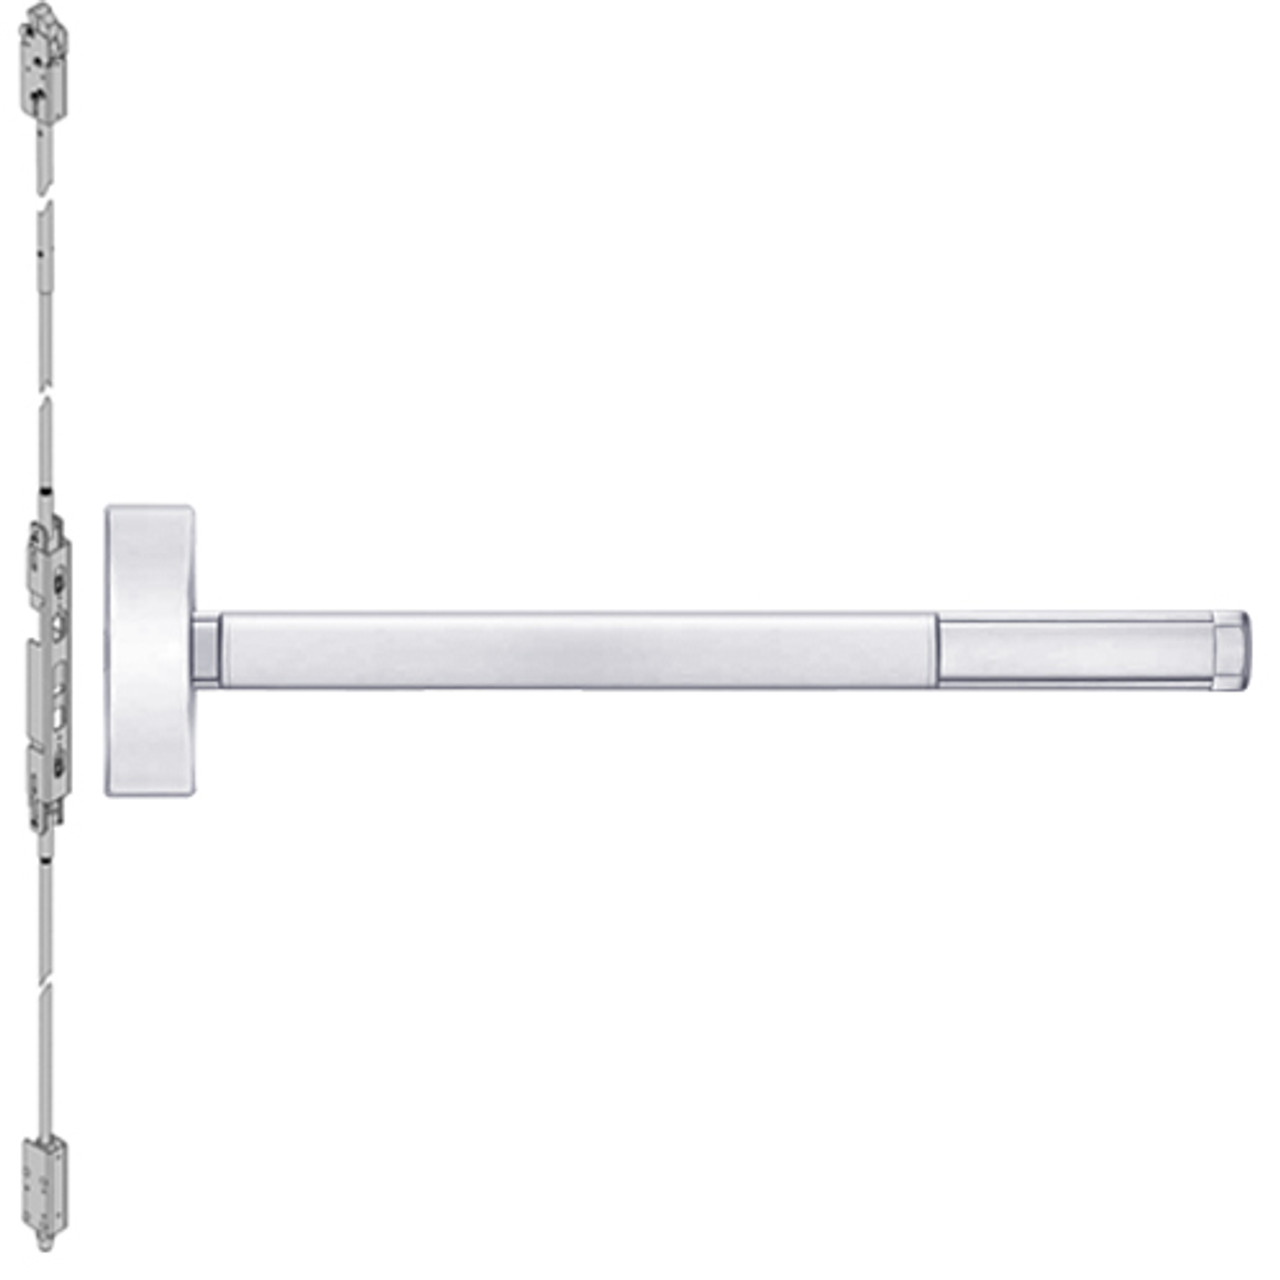 ELR2805LBR-625-48 PHI 2800 Series Concealed Vertical Rod Exit Device with Electric Latch Retraction Prepped for Key Controls Thumb Piece in Bright Chrome Finish